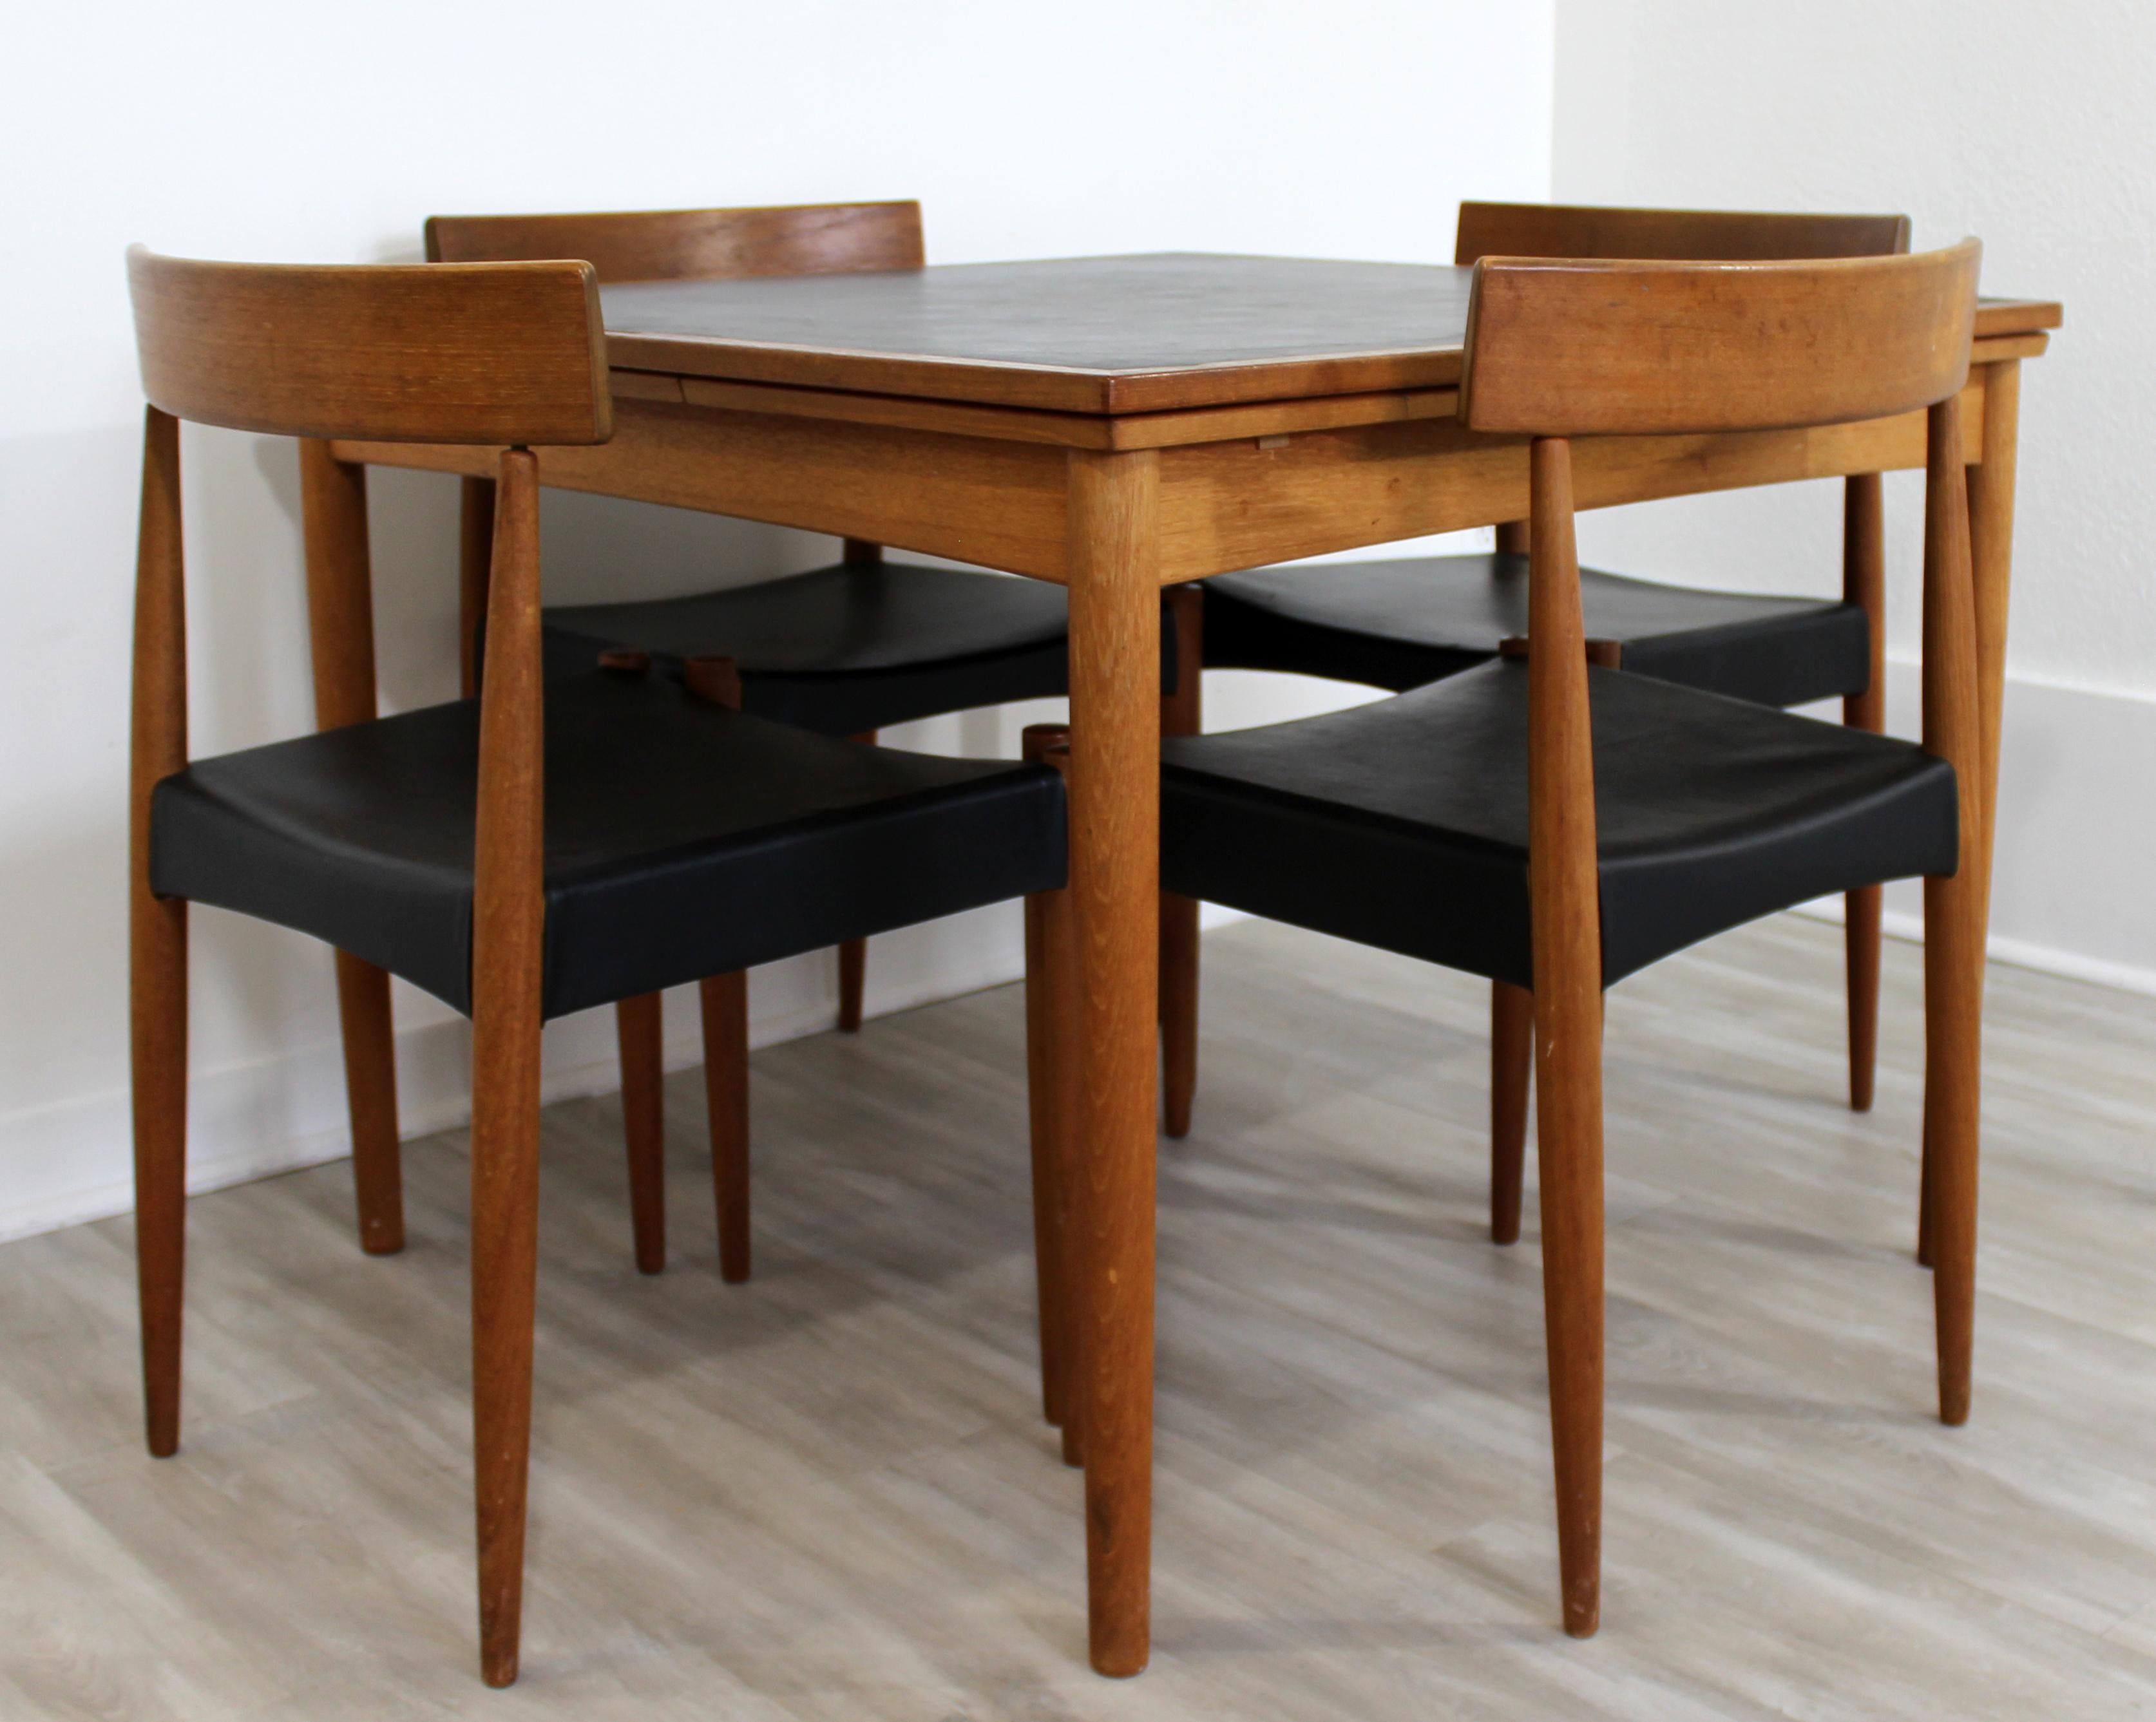 Mid-20th Century Mid-Century Modern Danish Leather Top Expandable Dinette Dining Table 4 Chairs